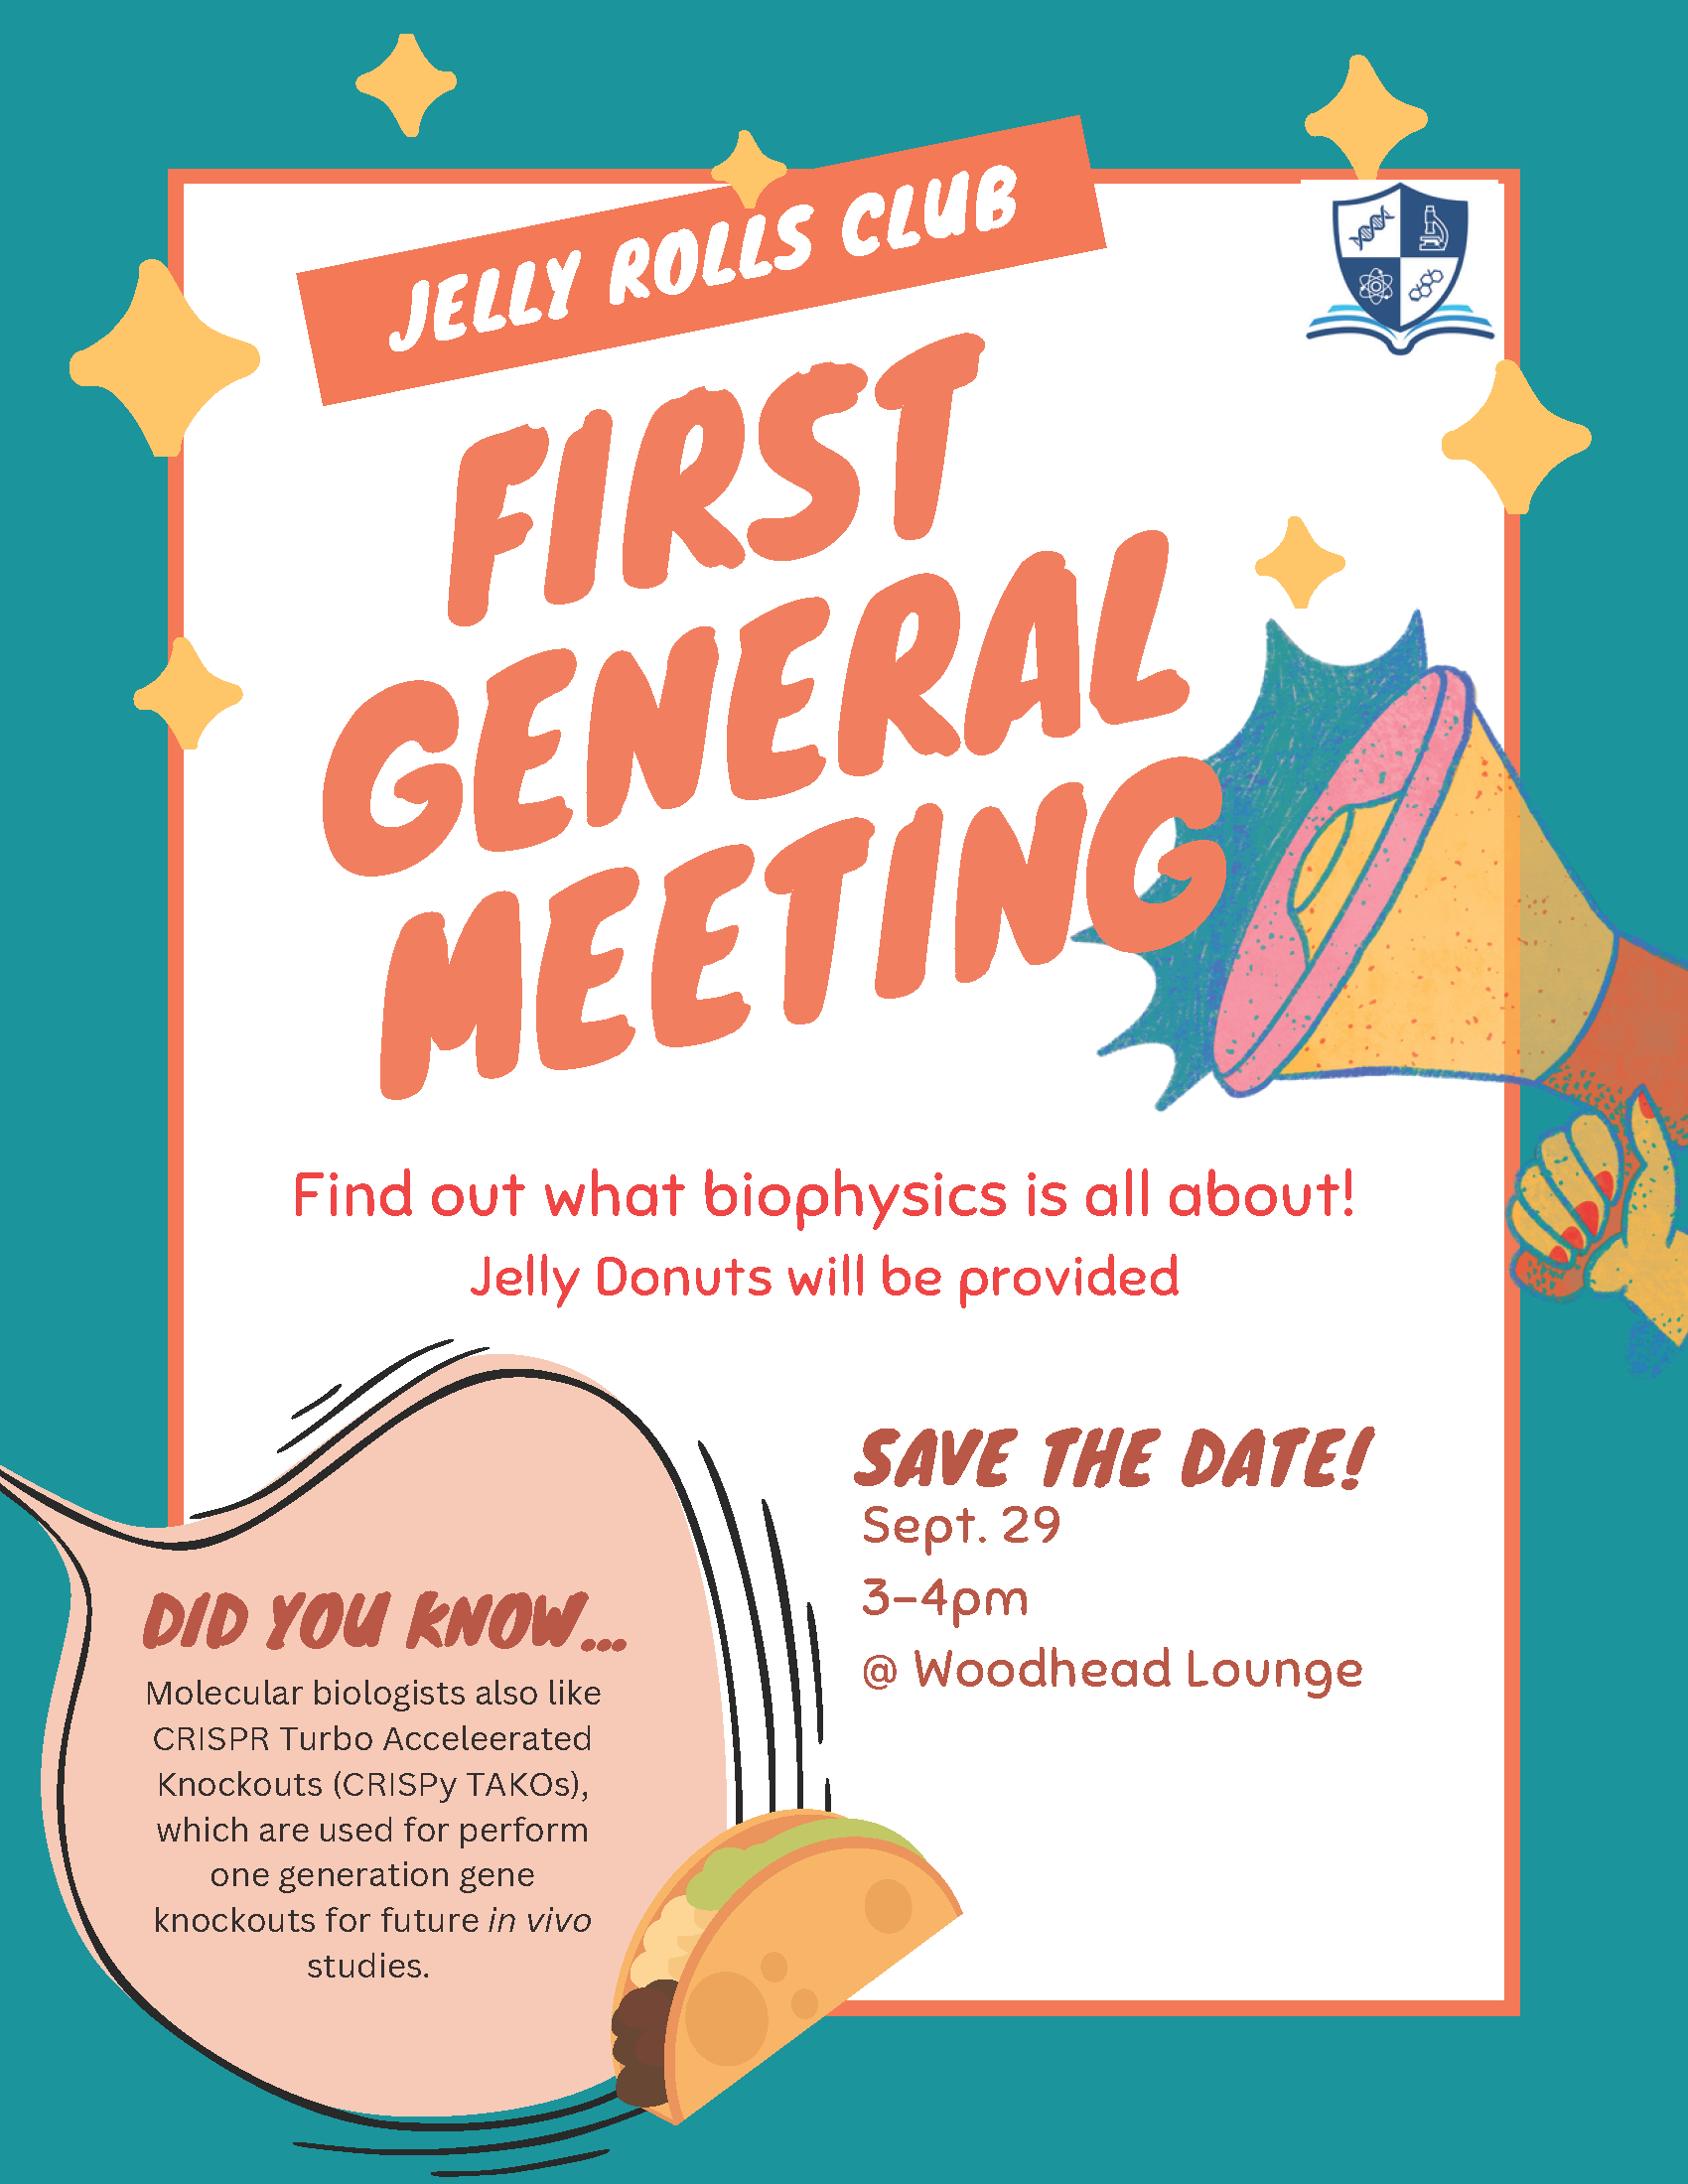 Jelly Rolls First Meeting. September 29th, 3-4pm, Woodhead Lounge